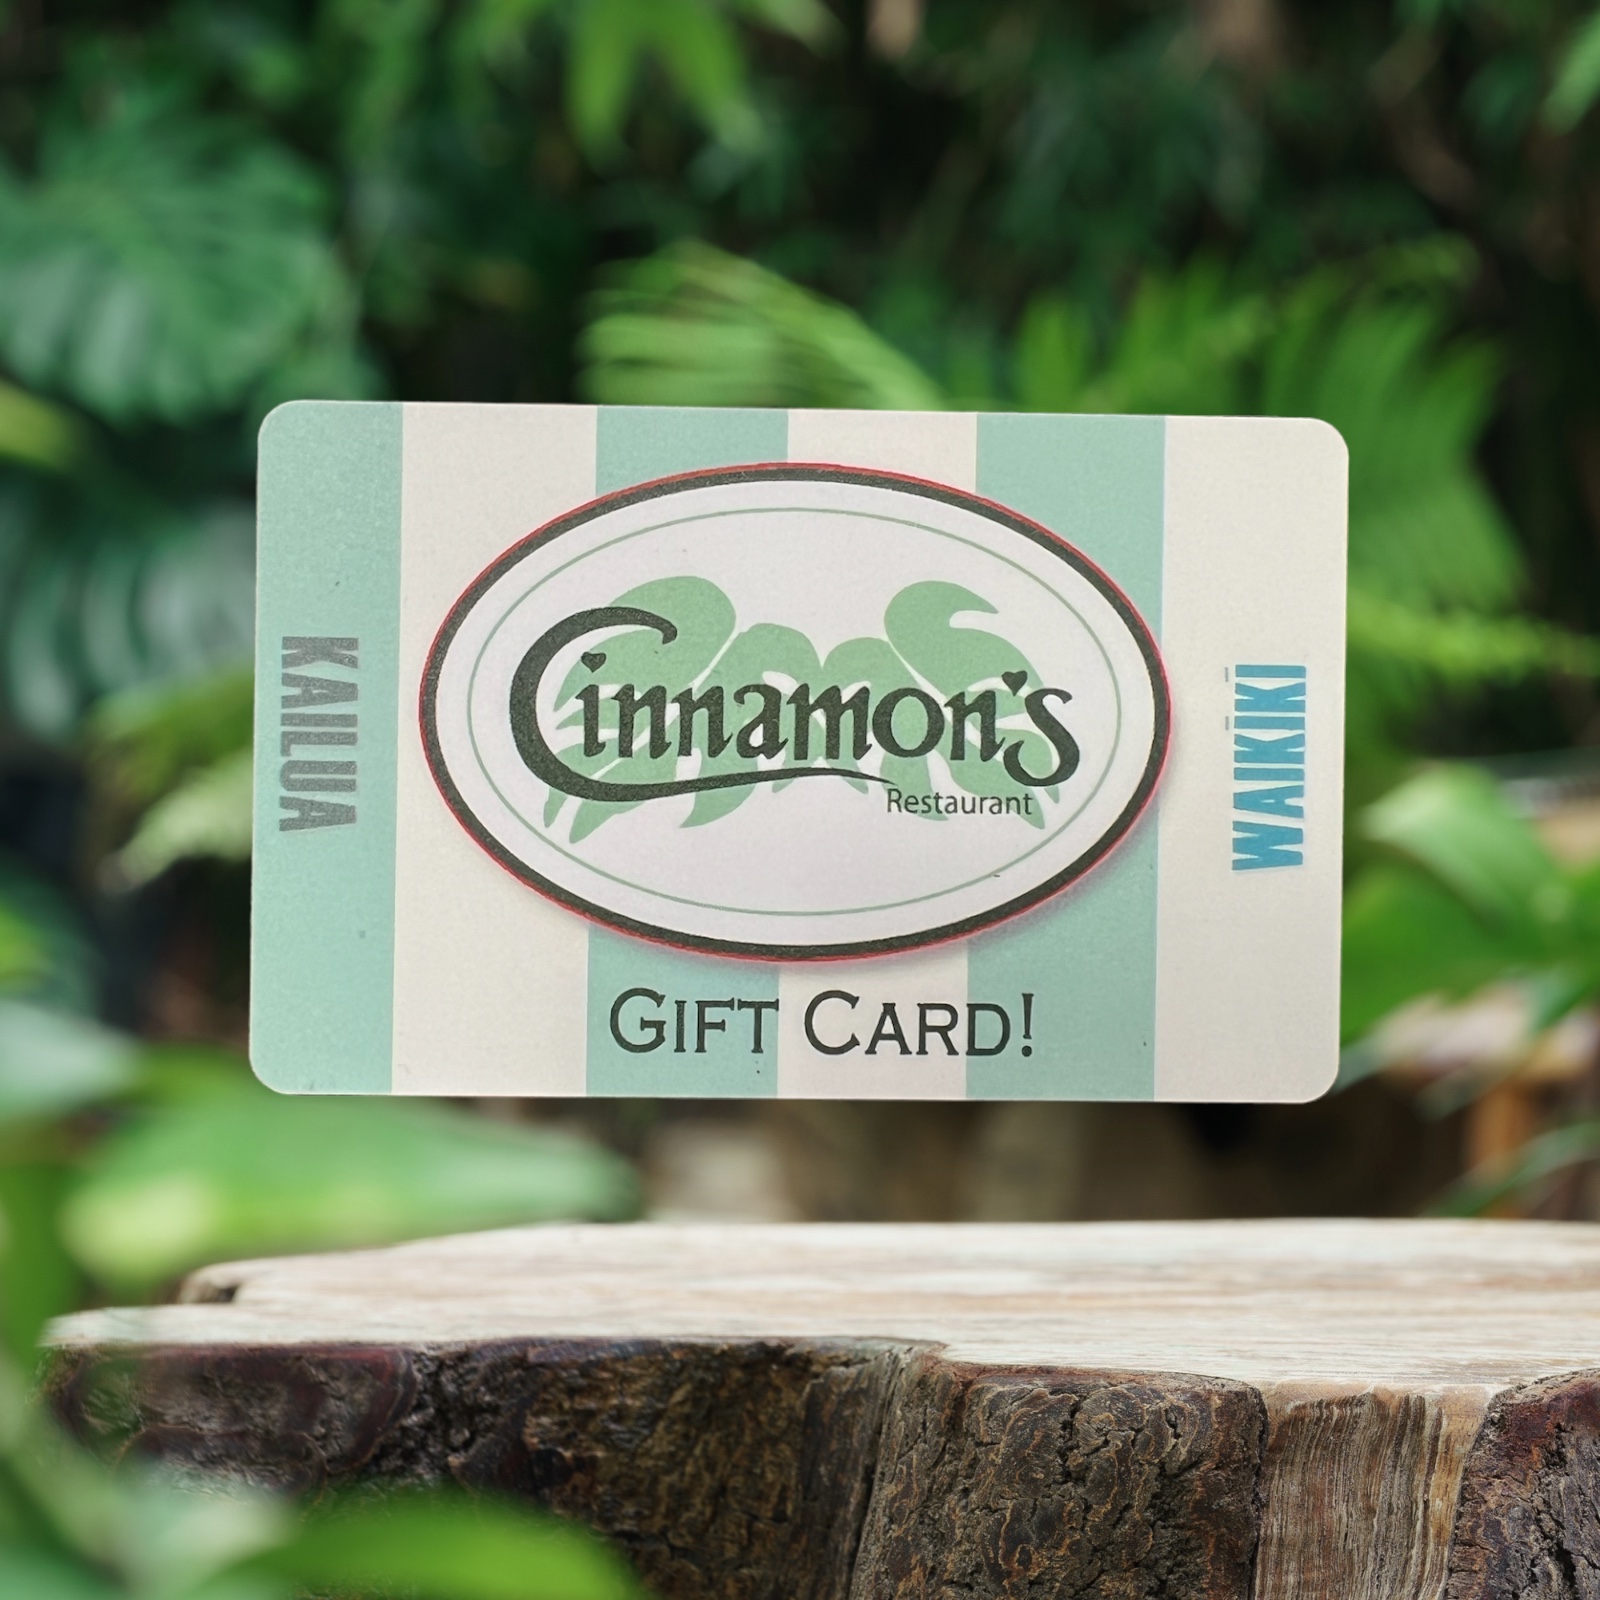 Need a Gift Card? Purchase one here!